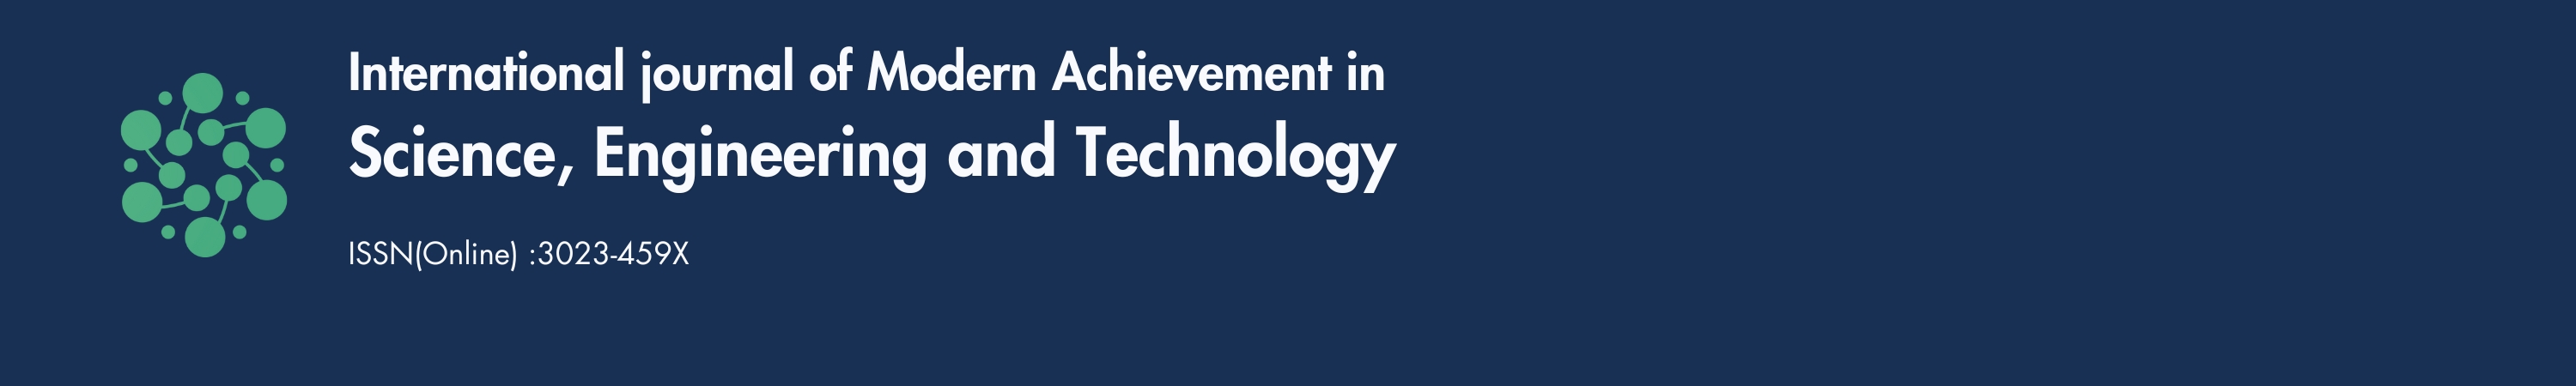  International journal of Modern Achievement in Science, Engineering and Technology